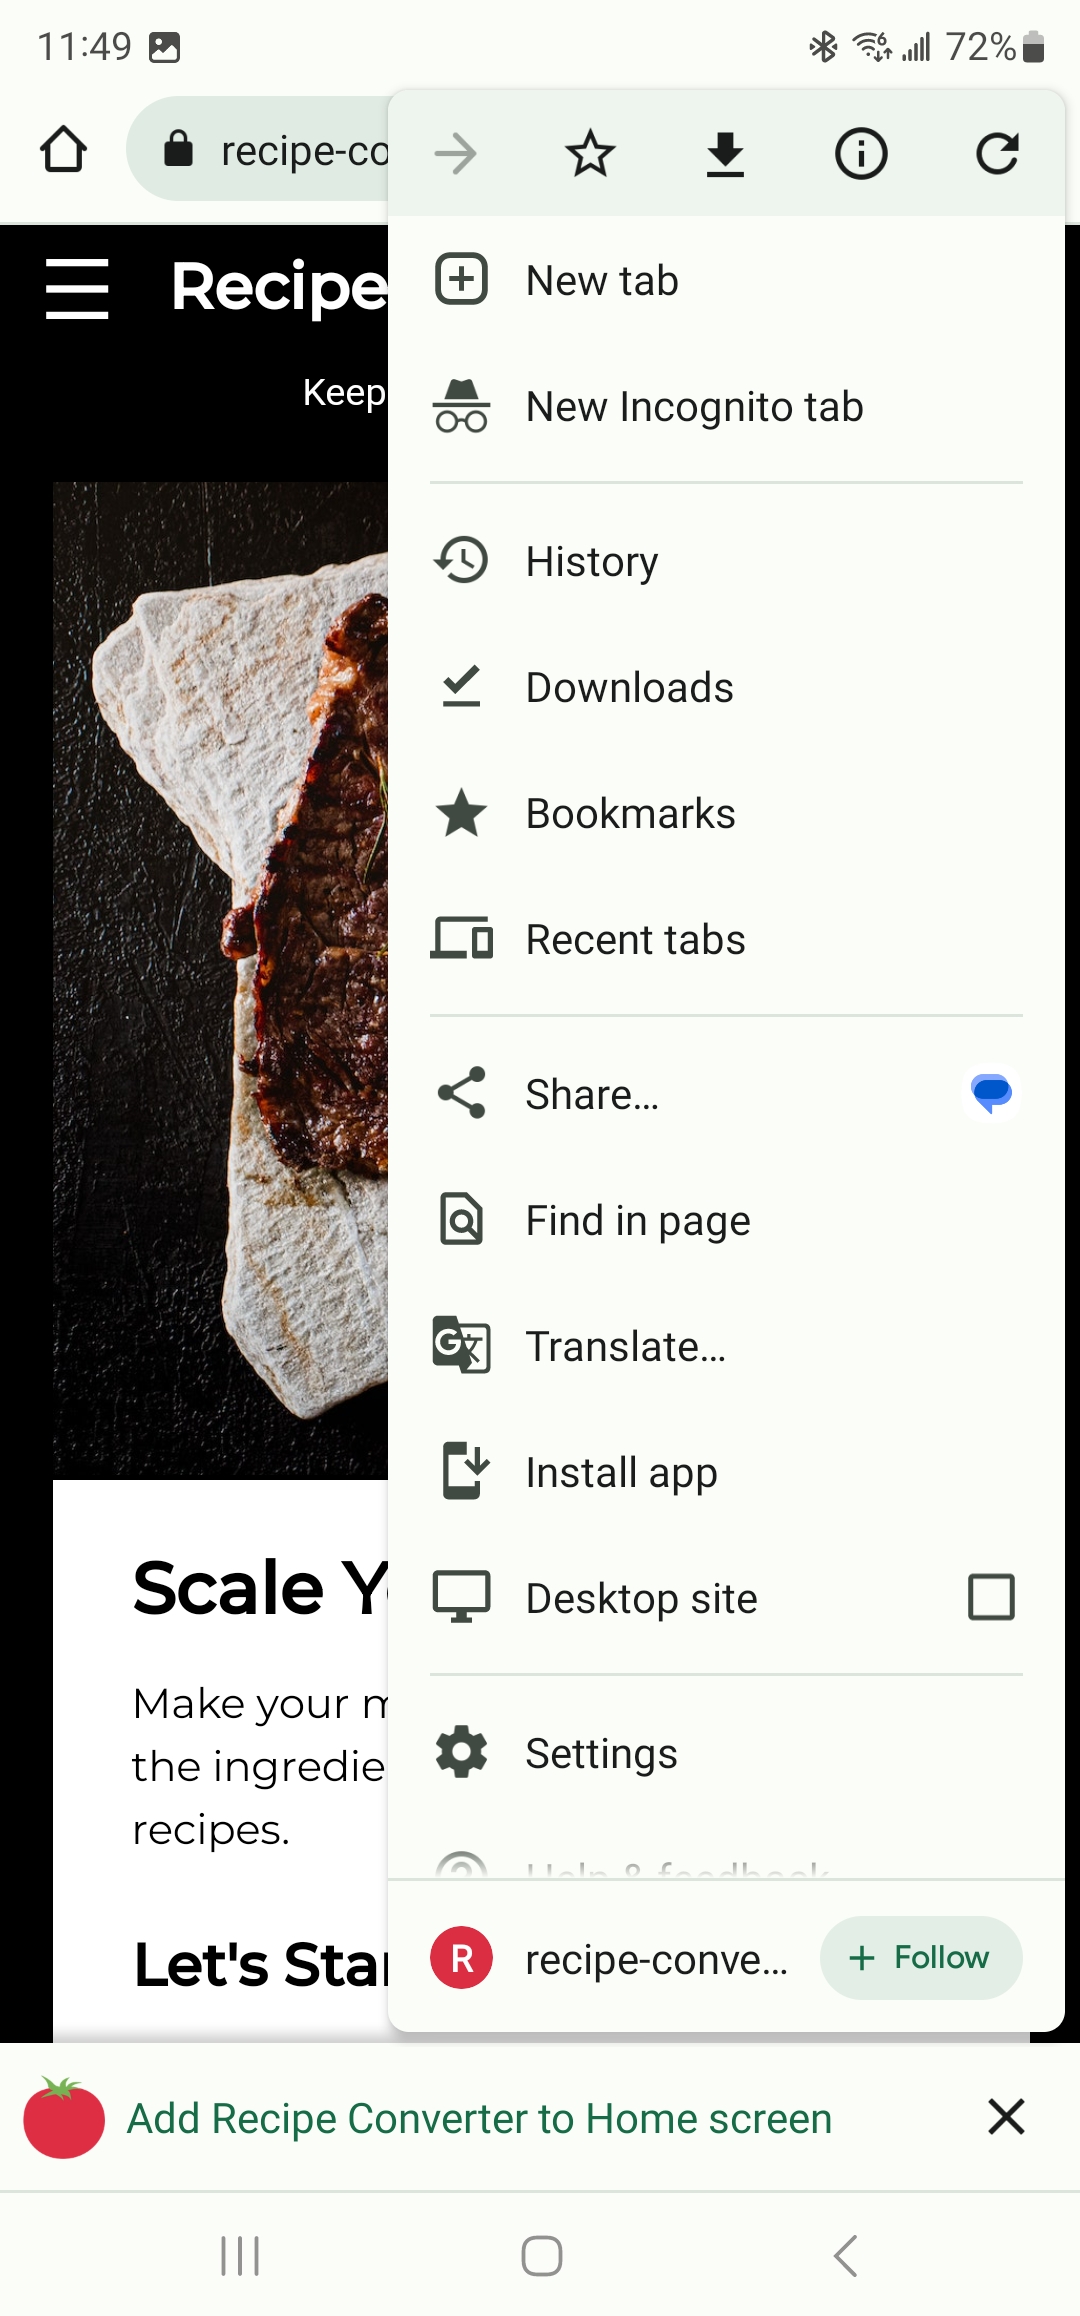 Example of install app option in browser settings